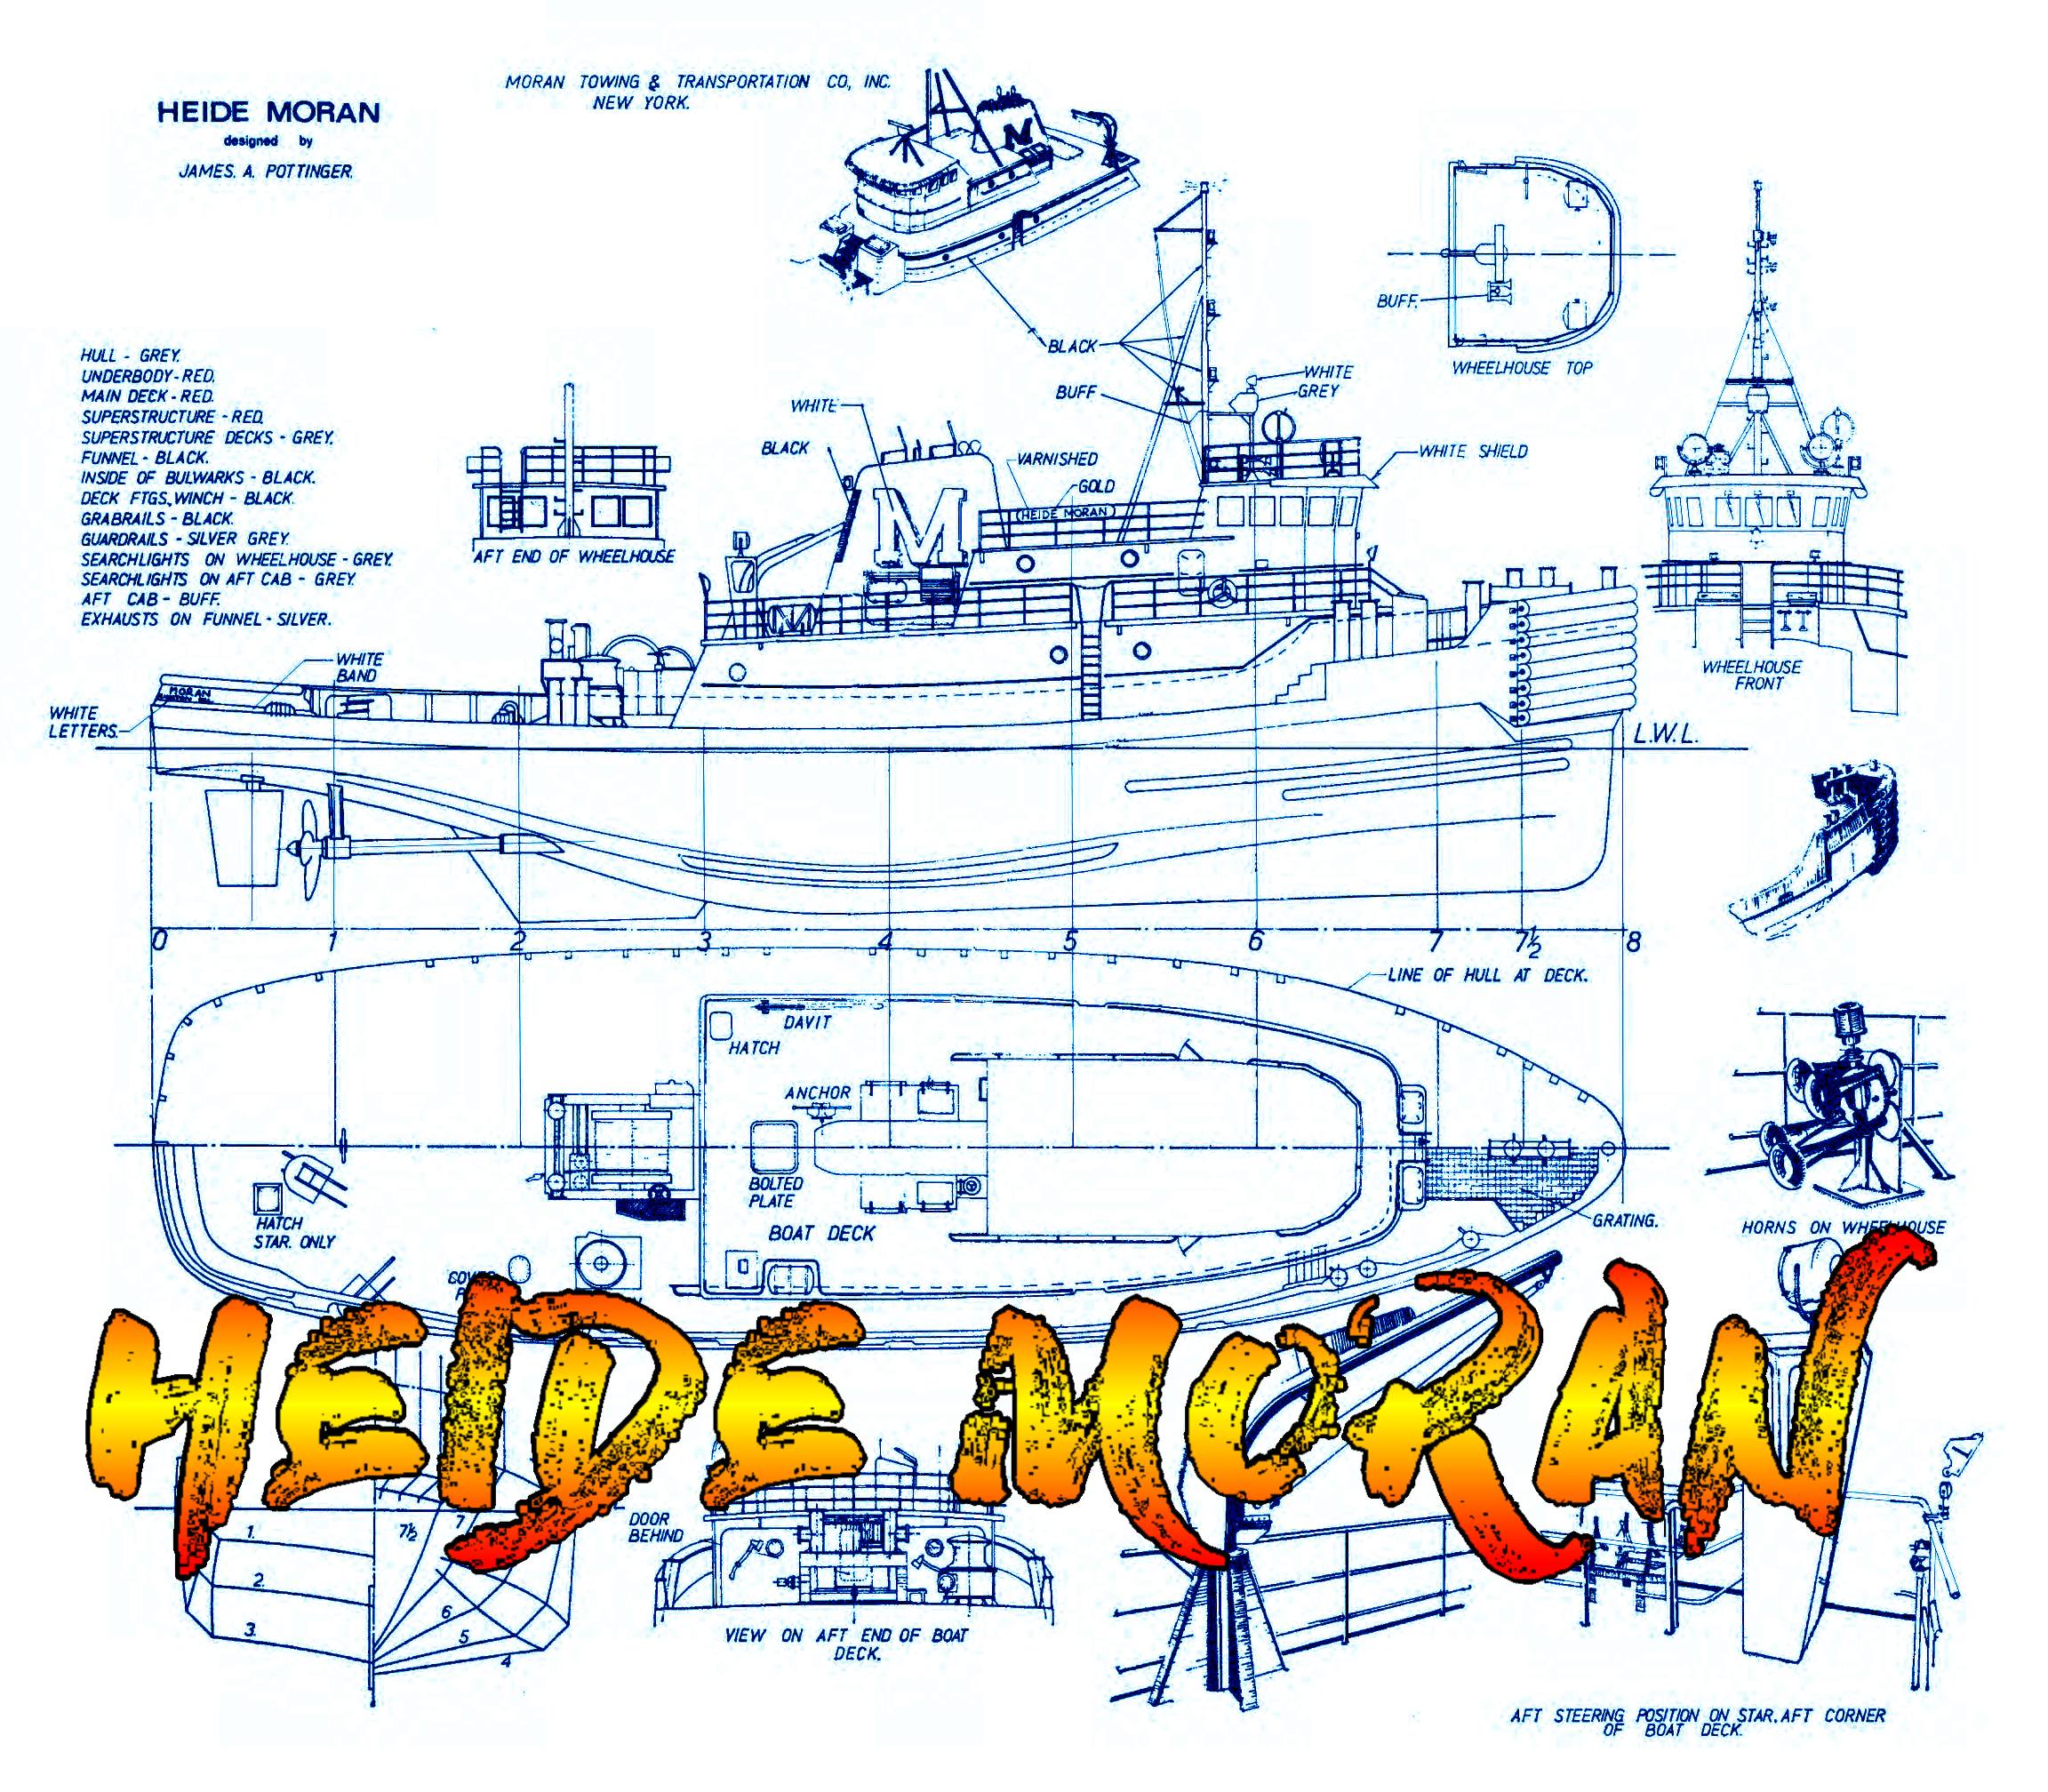 full size printed plan scale to build a1:64 unusual tug heide moran suitable for radio control